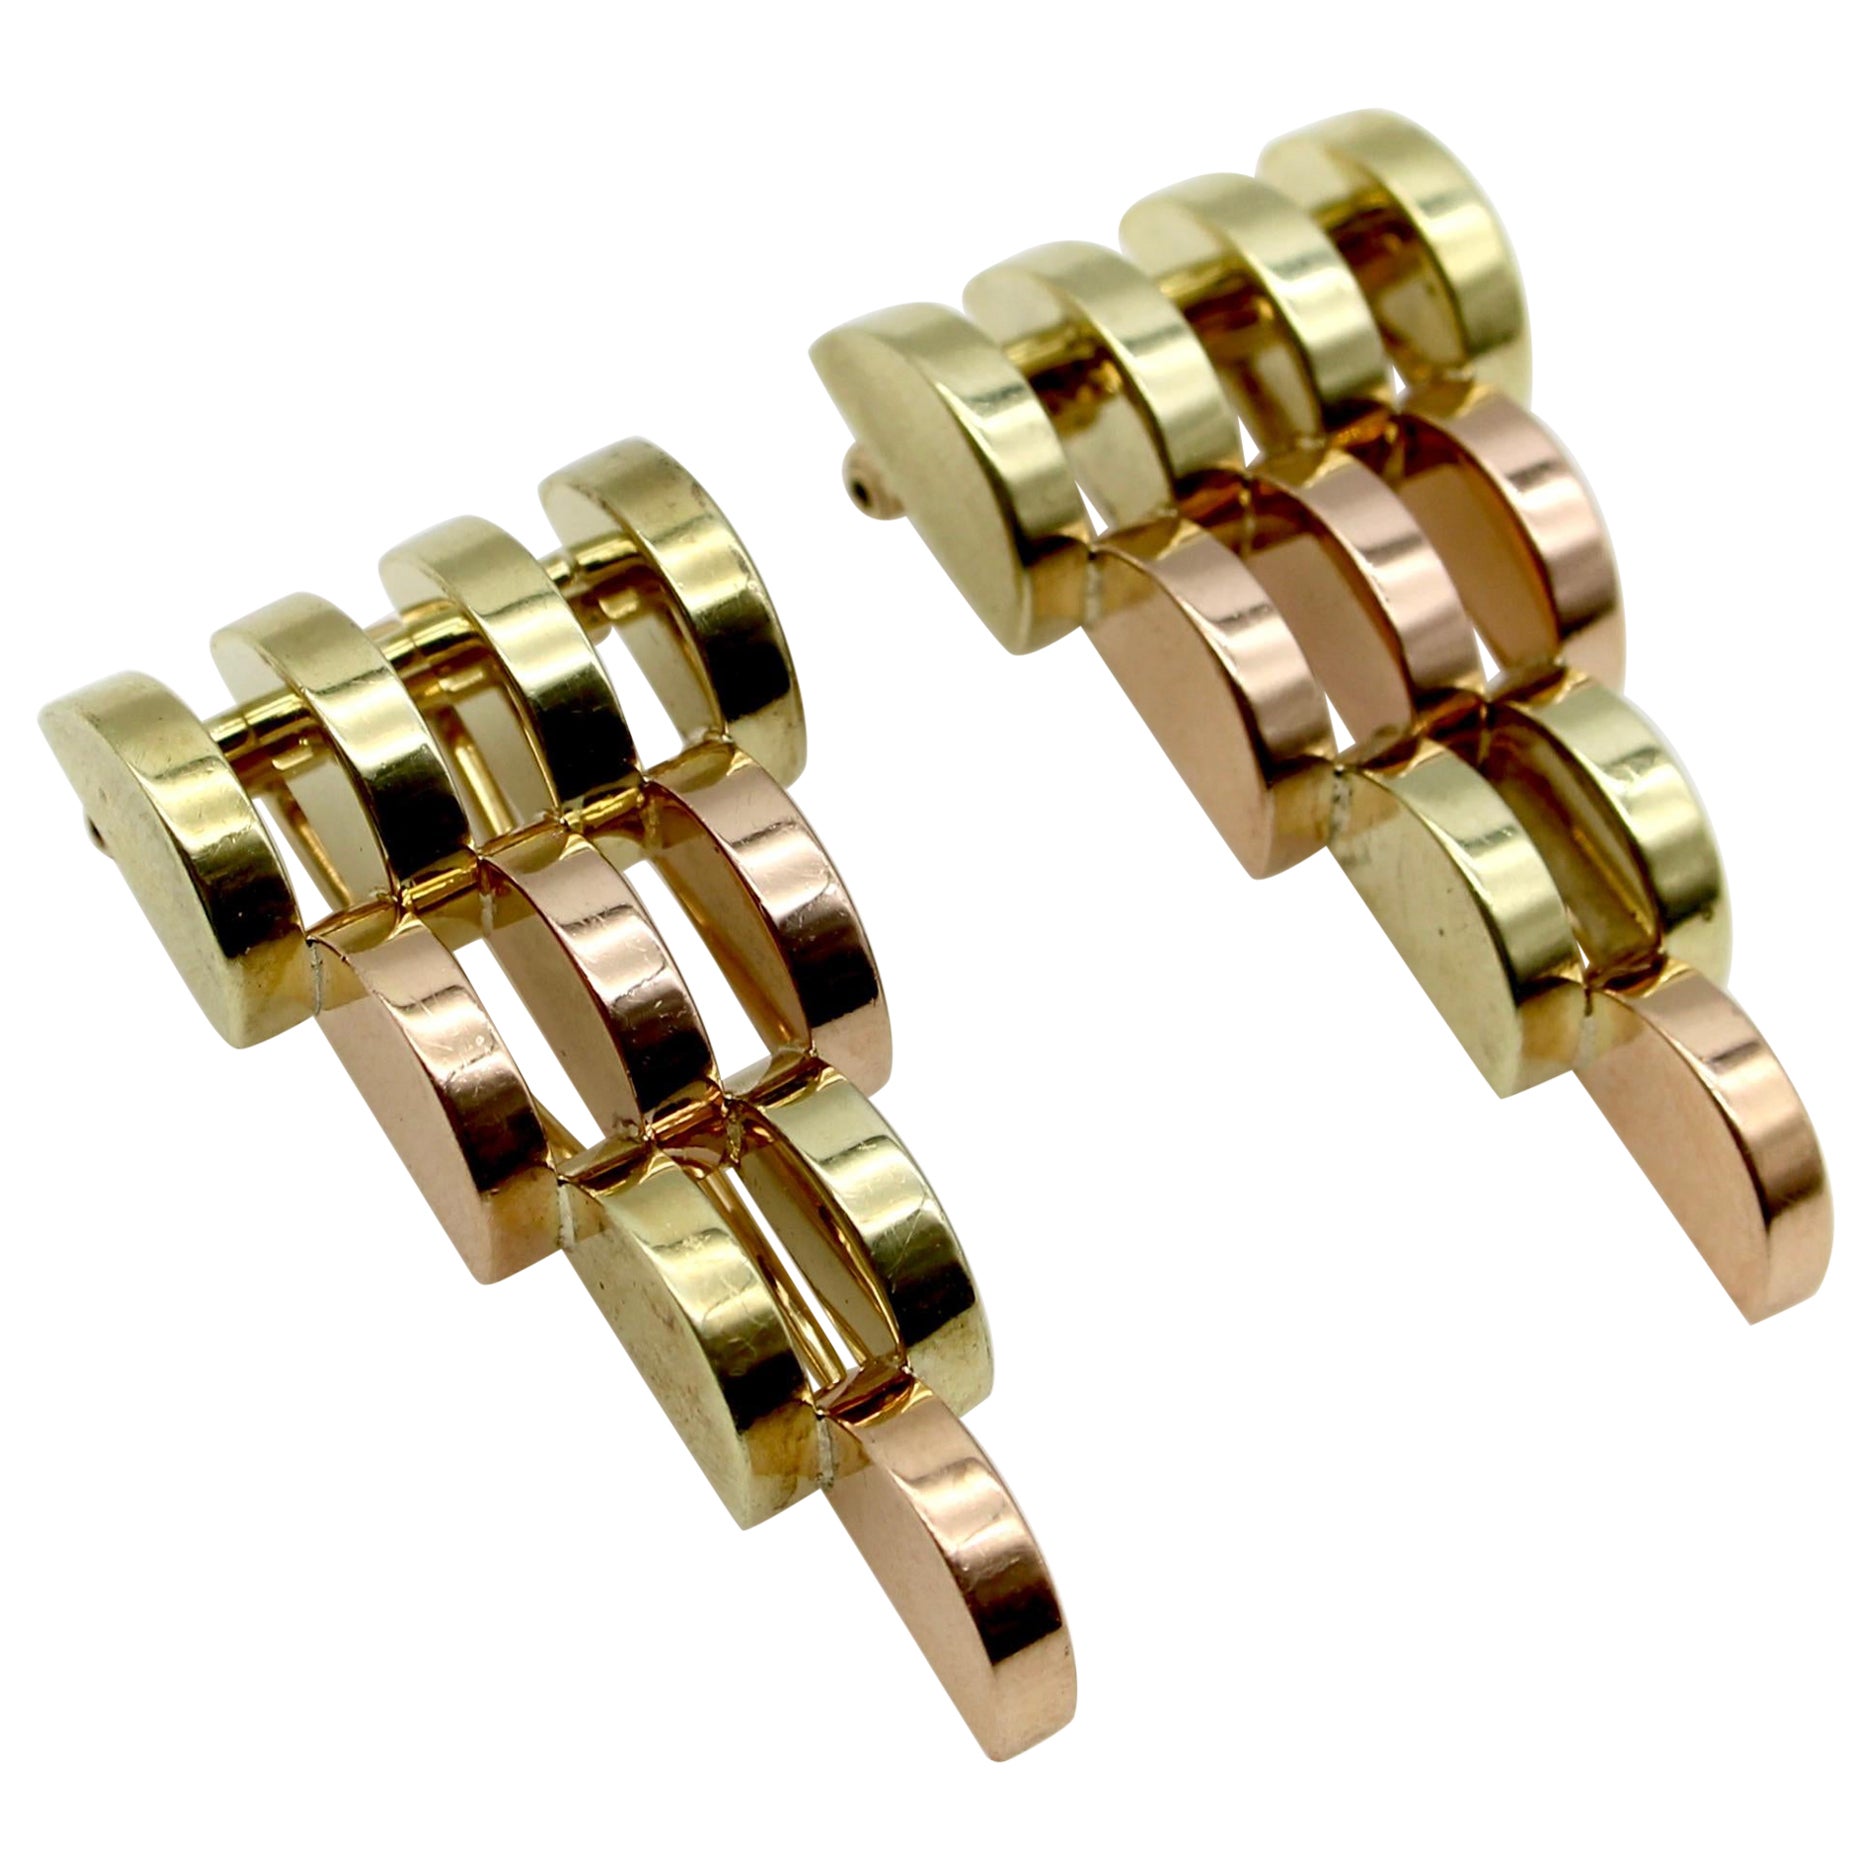 Retro Cartier 14K Yellow and Rose Gold Pyramid Dress Clips 